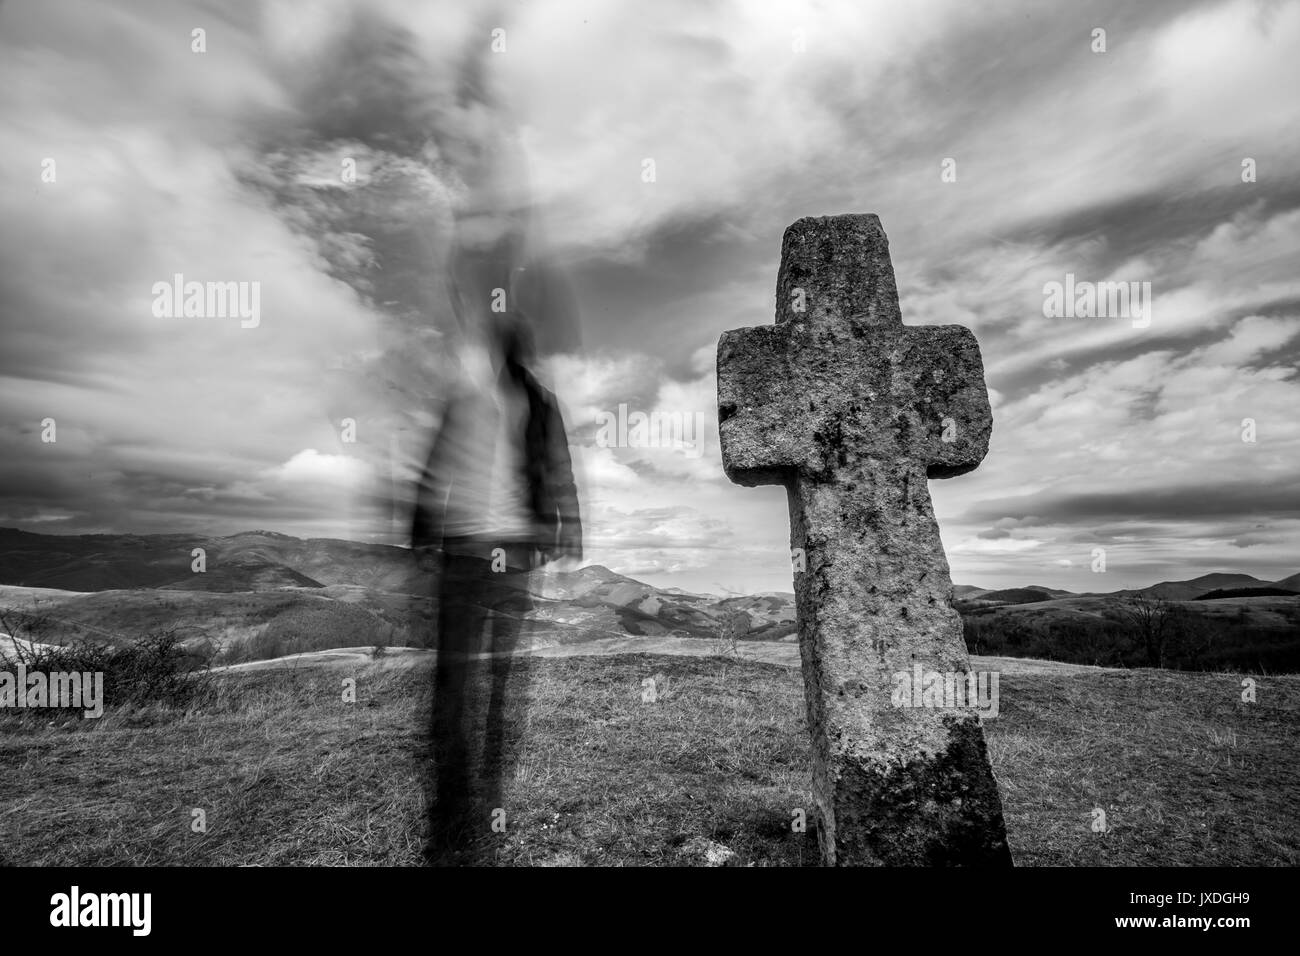 Ancient Christian stone cross and blurred silhouette of man Stock Photo